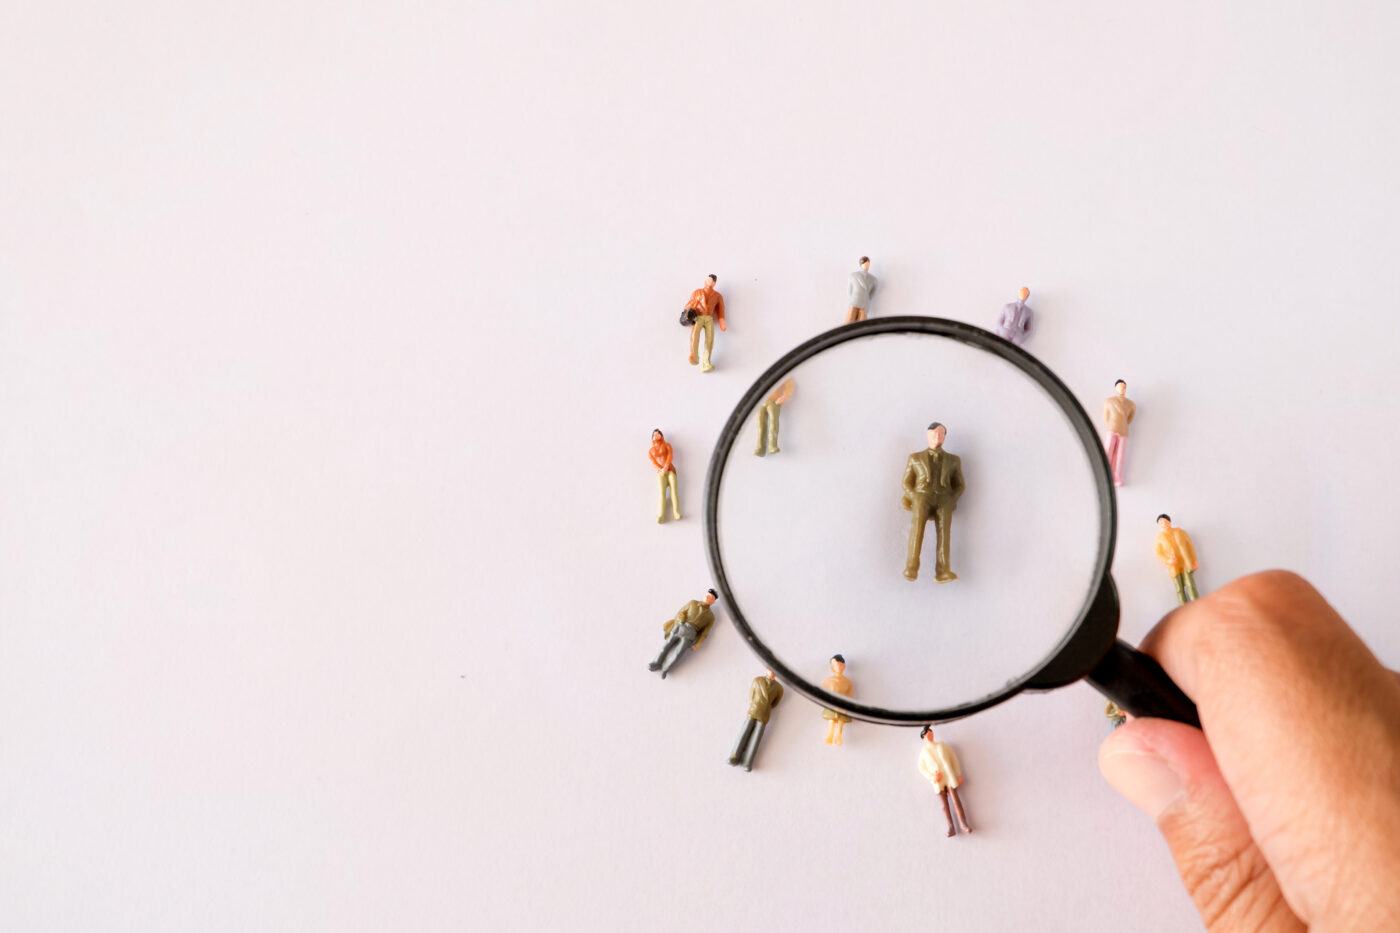 Magnifying glass on an individual (candidate) to demonstrate insightful recruitment